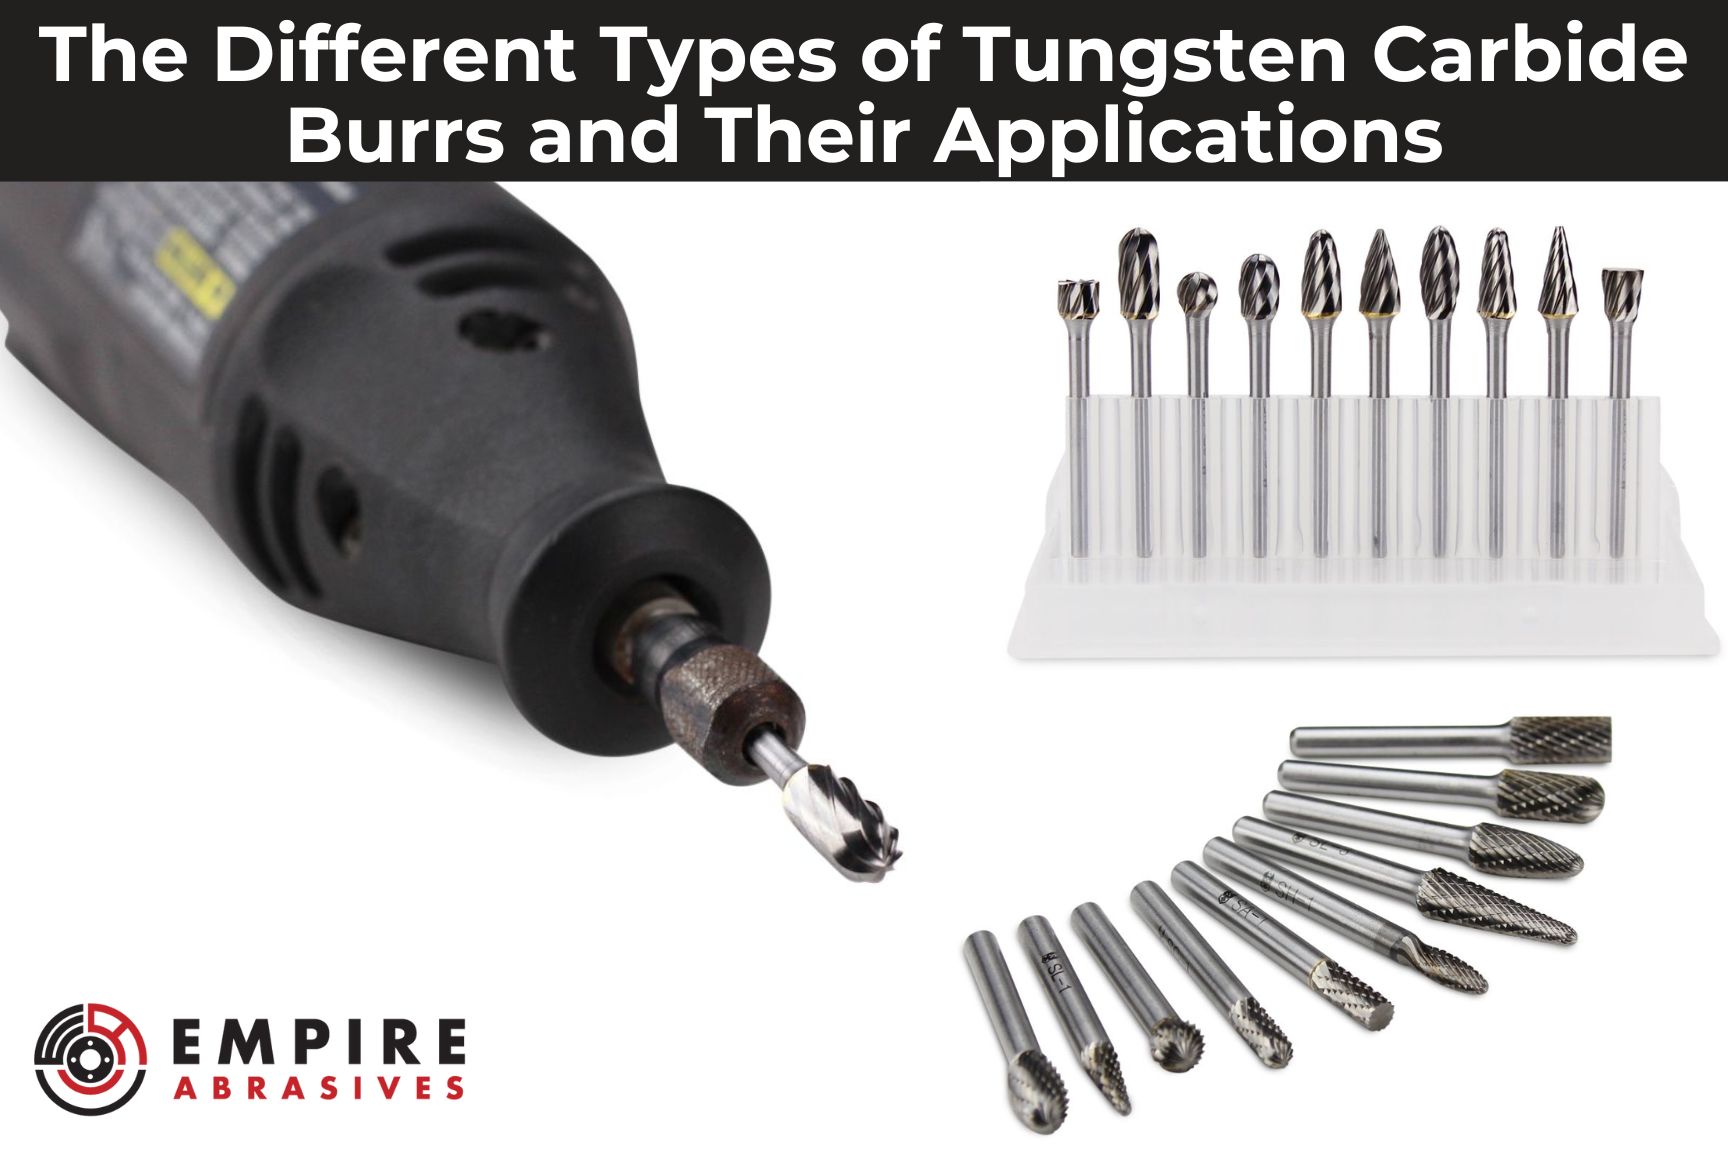 The Different Types of Tungsten Carbide Burrs and Their Applications